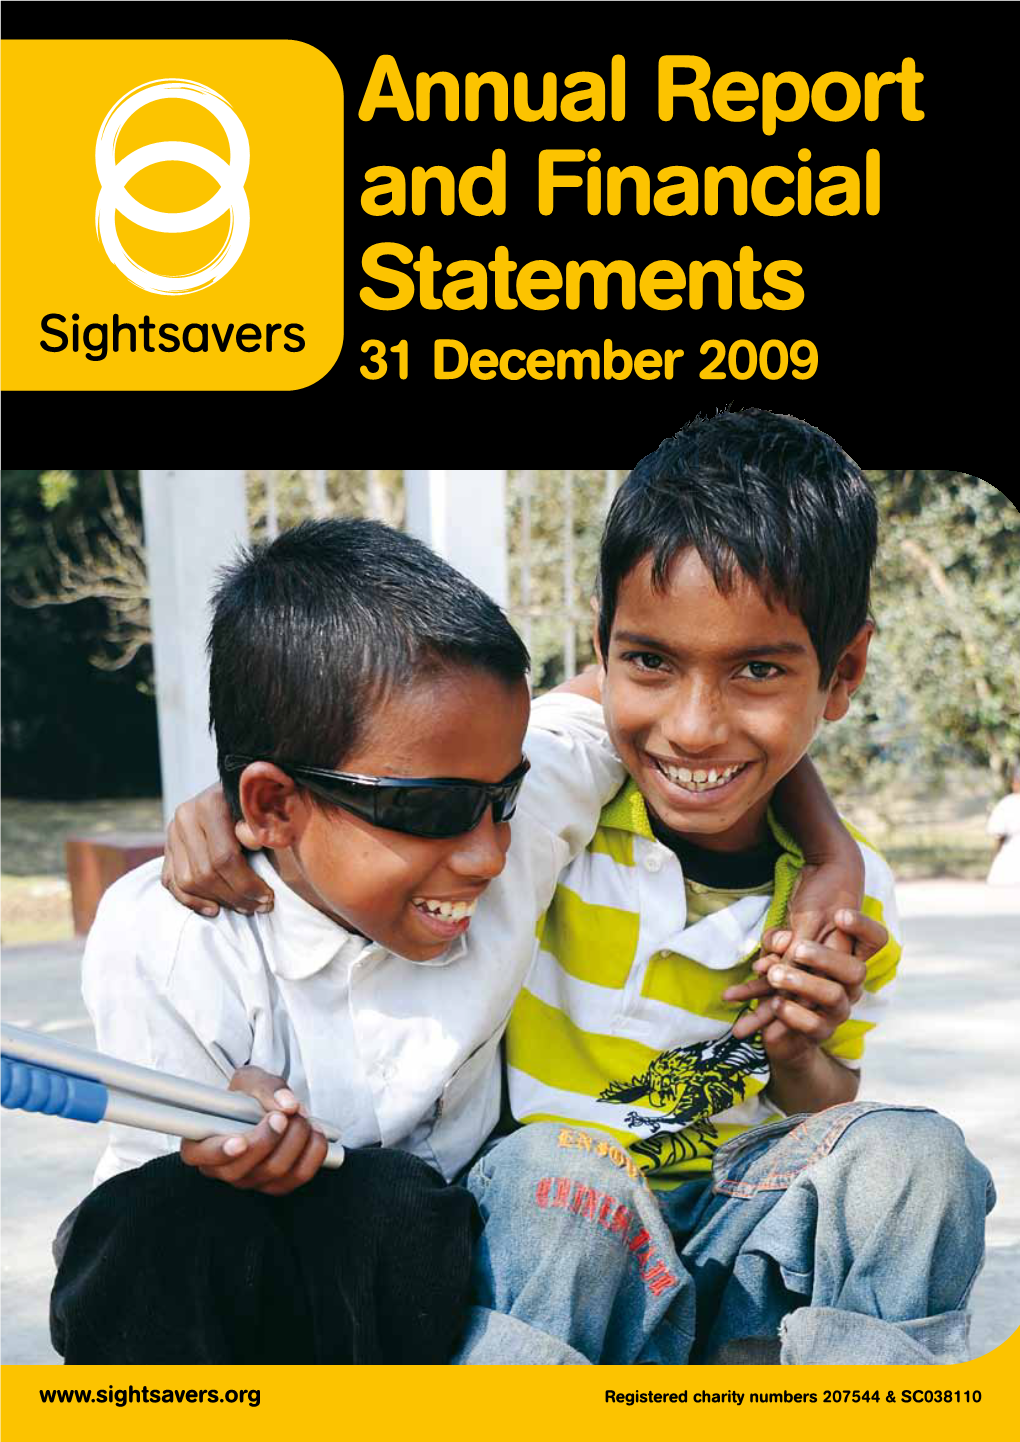 Annual Report and Financial Statements 31 December 2009